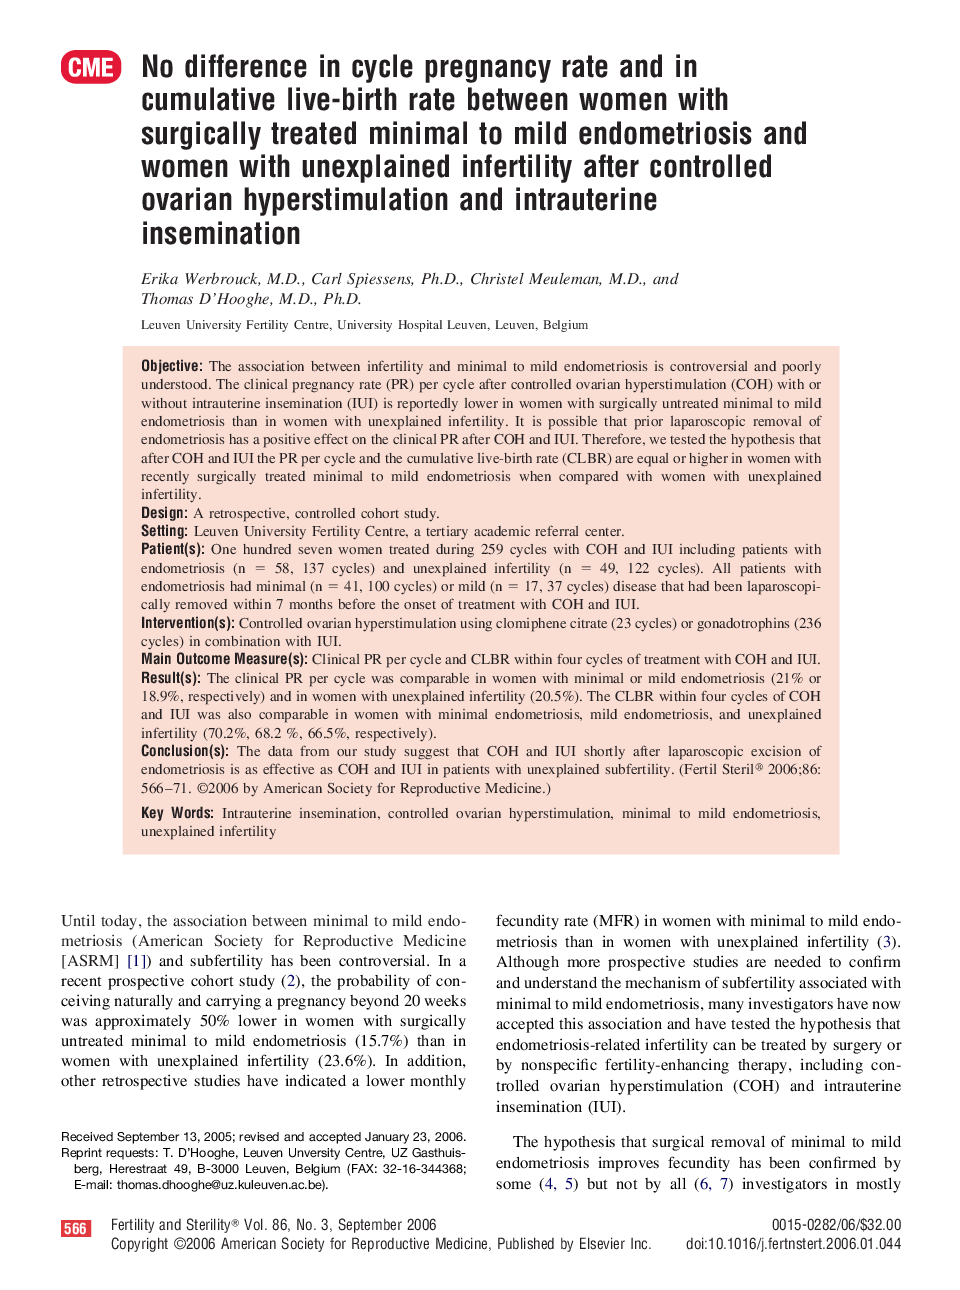 No difference in cycle pregnancy rate and in cumulative live-birth rate between women with surgically treated minimal to mild endometriosis and women with unexplained infertility after controlled ovarian hyperstimulation and intrauterine insemination